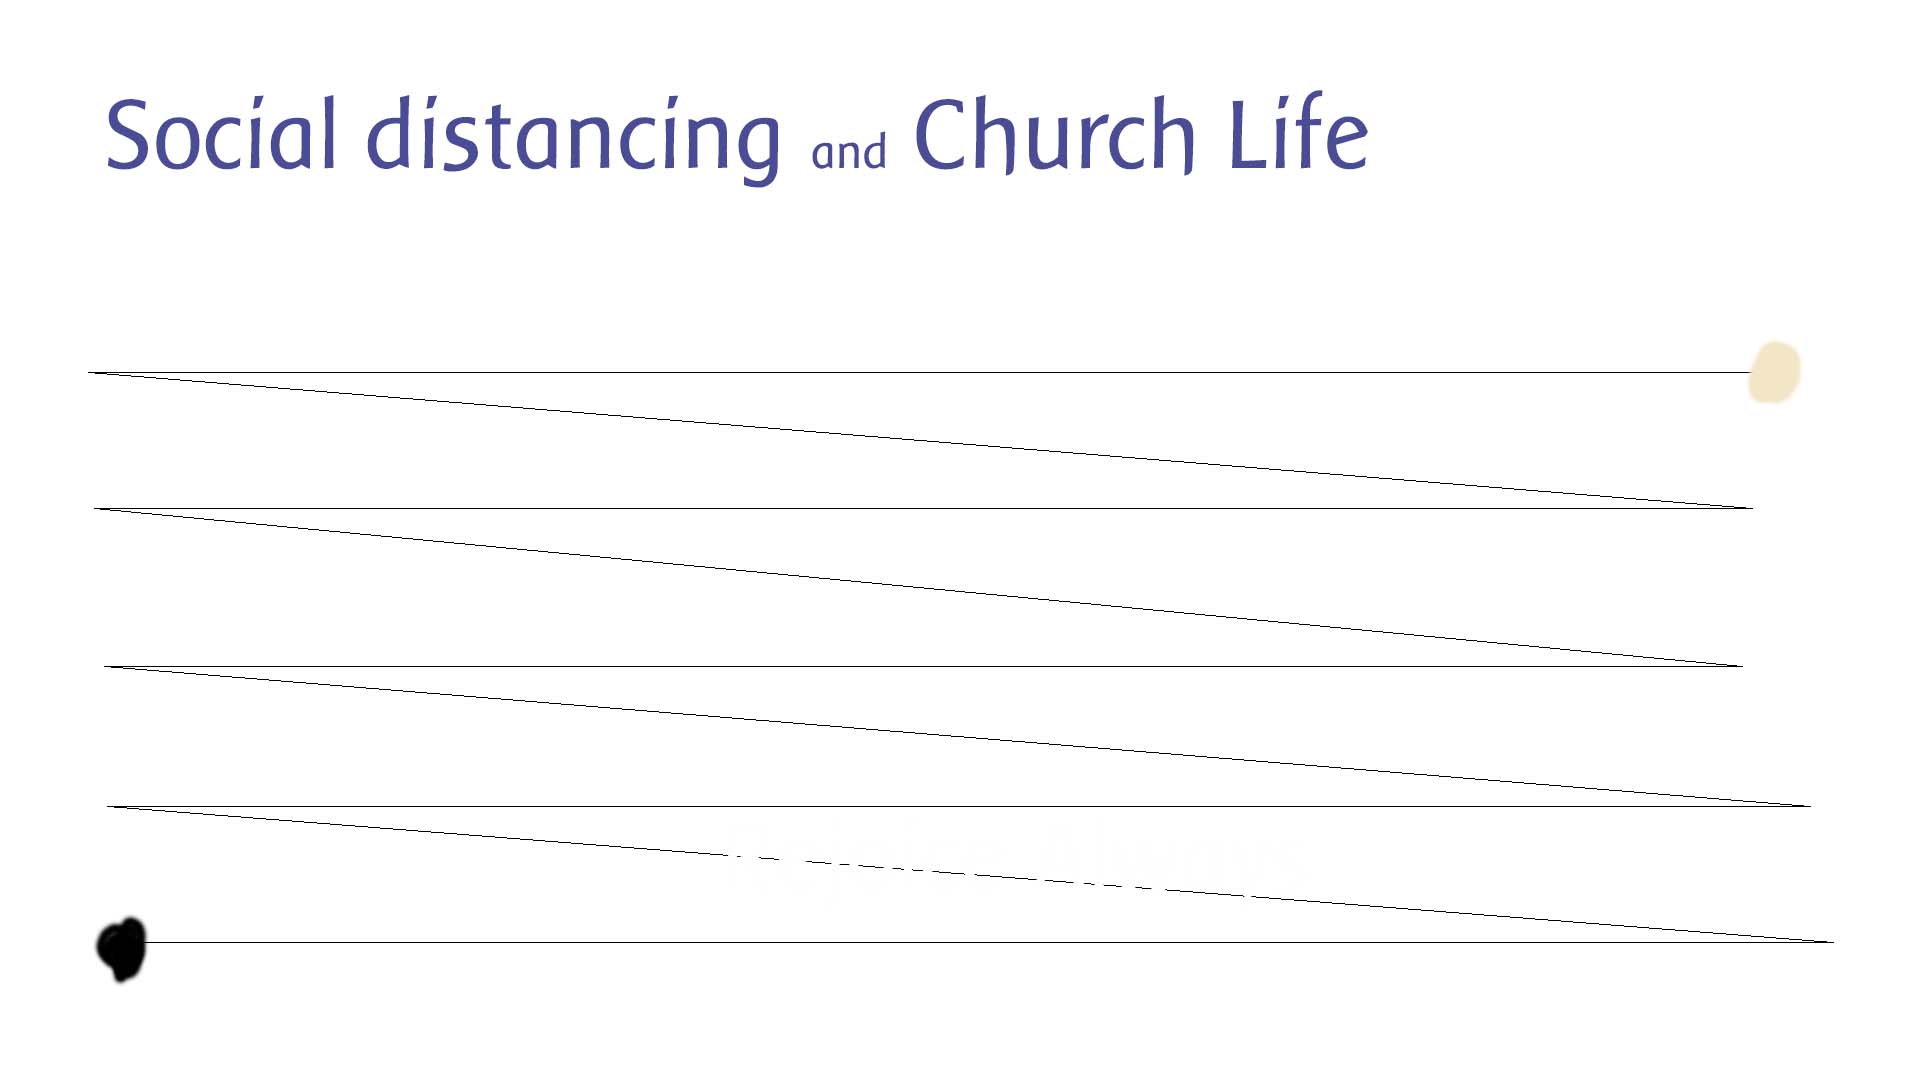 Social distancing and church